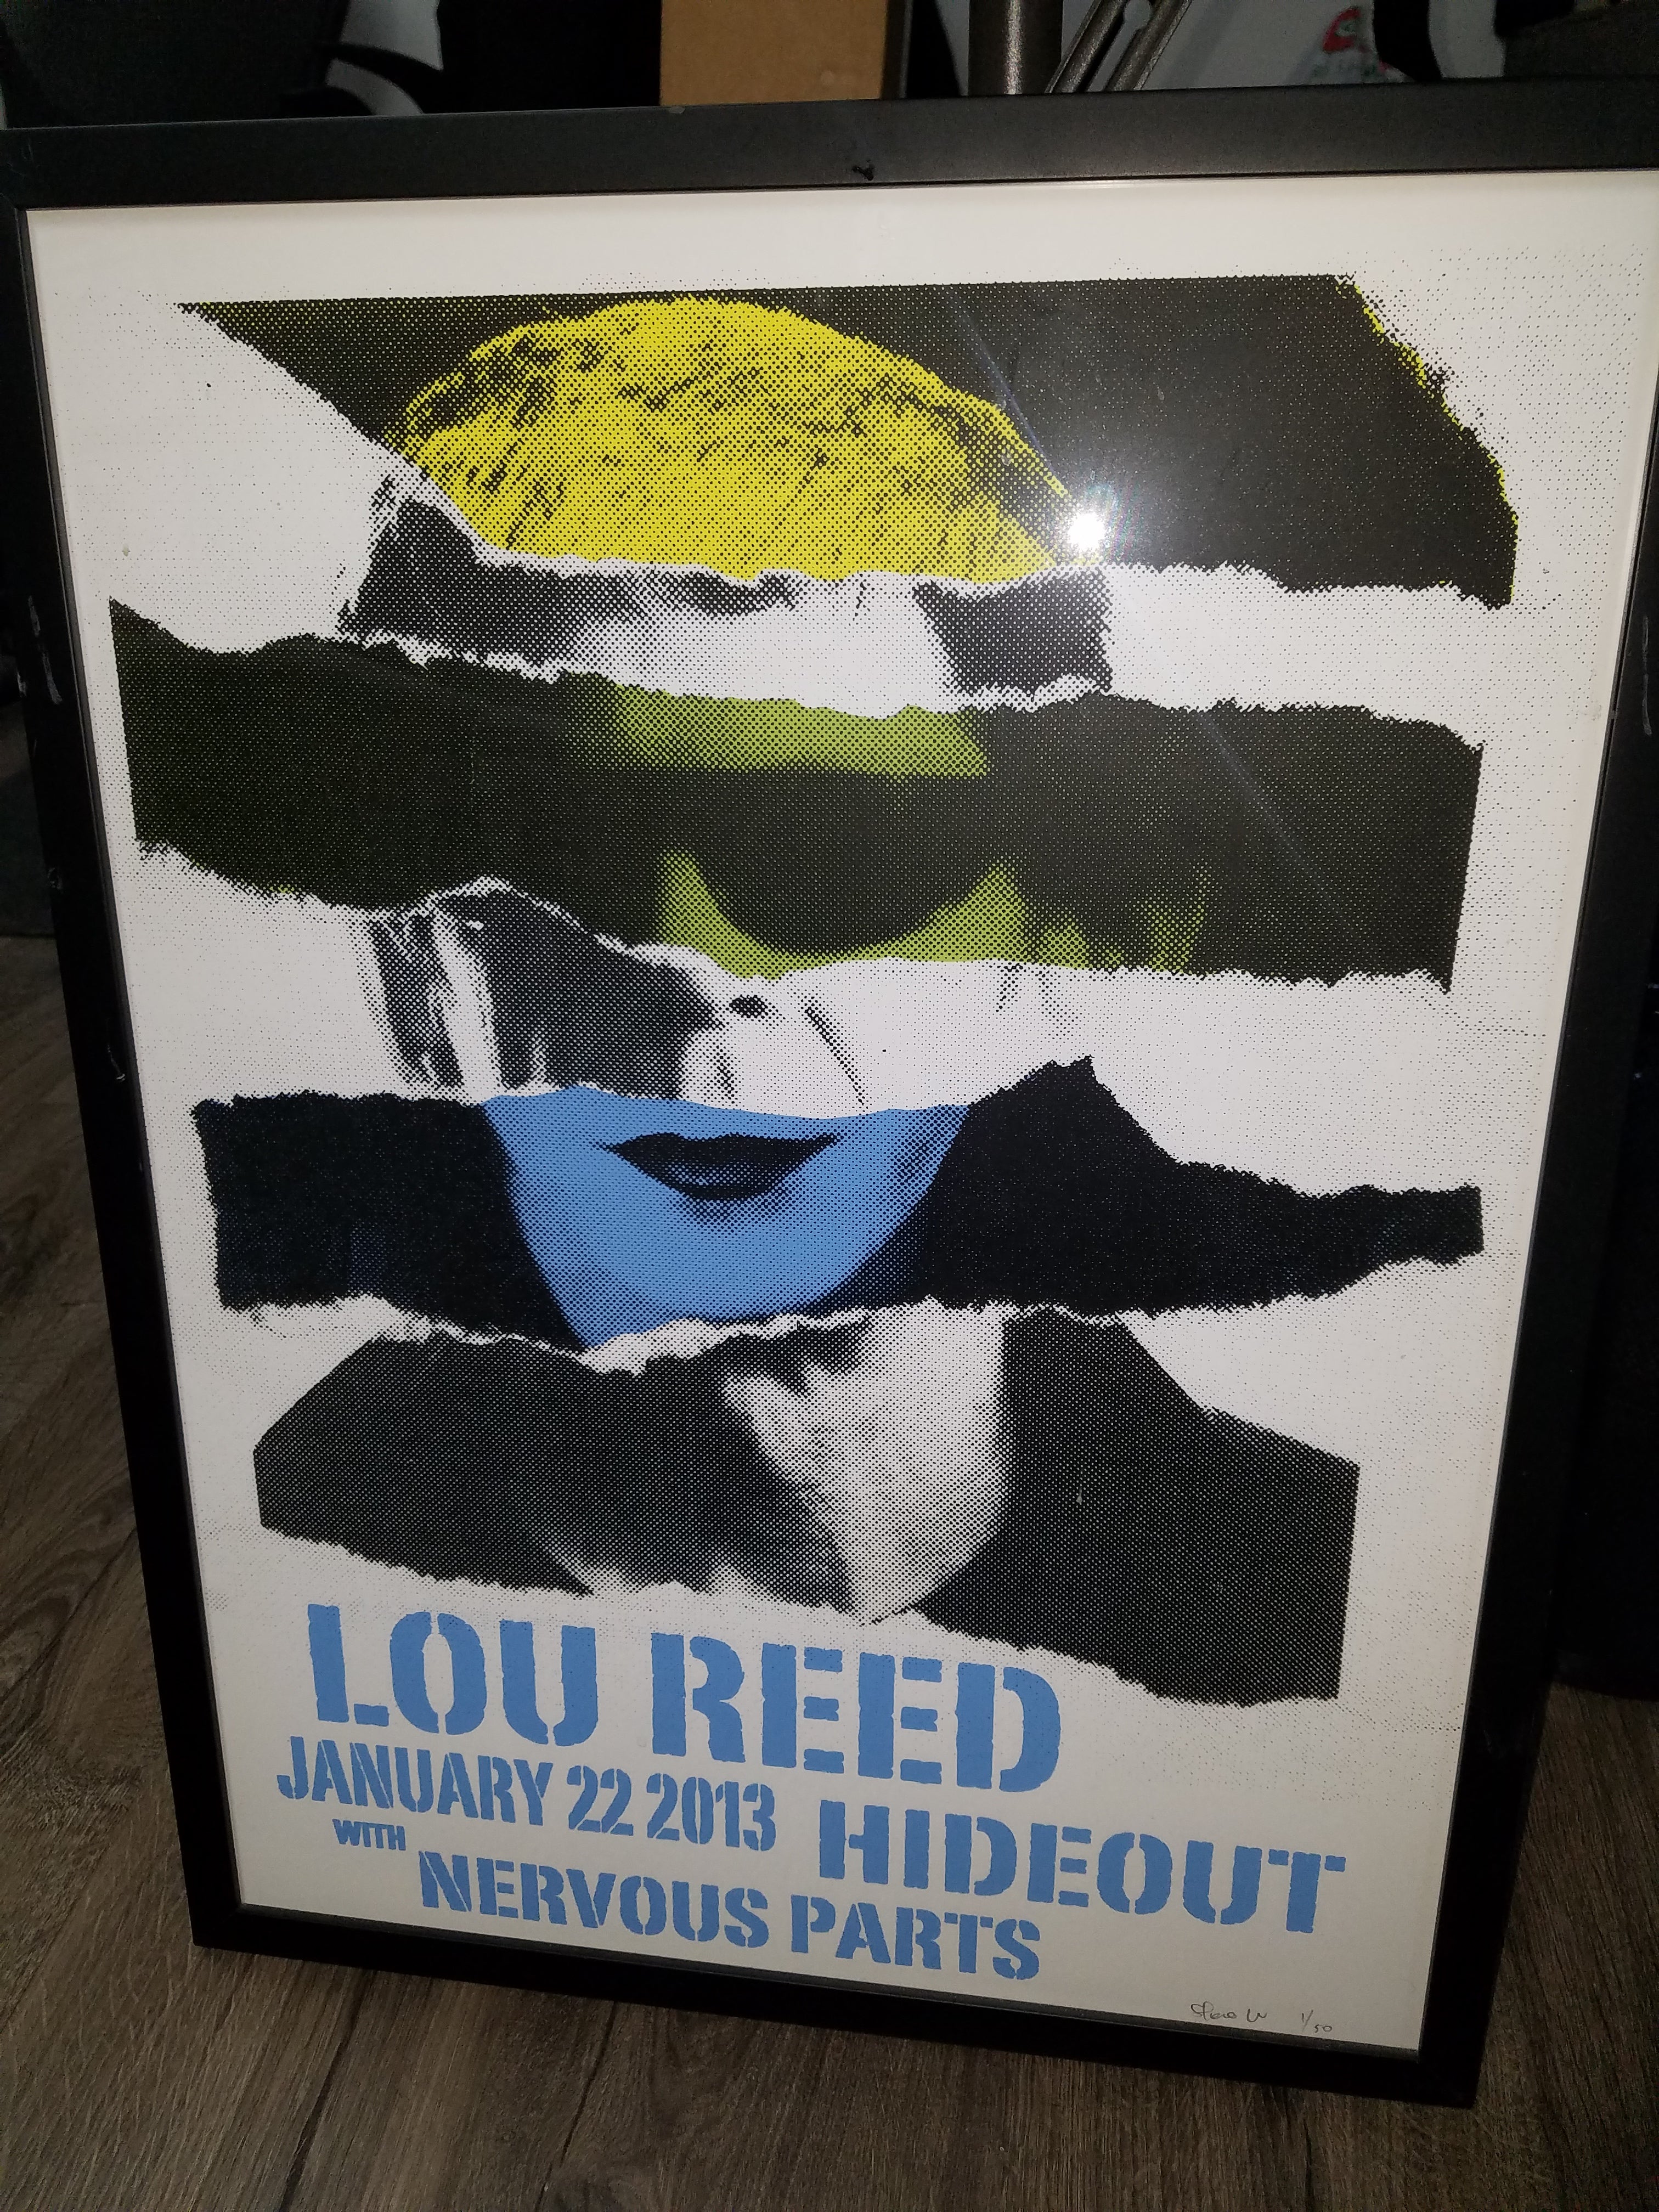 Title: Lou Reed 01/22/2013 Hideout with Nervous Parts  Artist: Steve W  Edition: Signed and numbered in a limited edition of 50 total copies from the artist.  Type: Screen Print Poster  Size: 18" x 24"  Framed dimensions: 19.5 x 25.5 inches  Notes: FRAMED in very good condition. Frame has minimal scuffing which is shown in pictures.